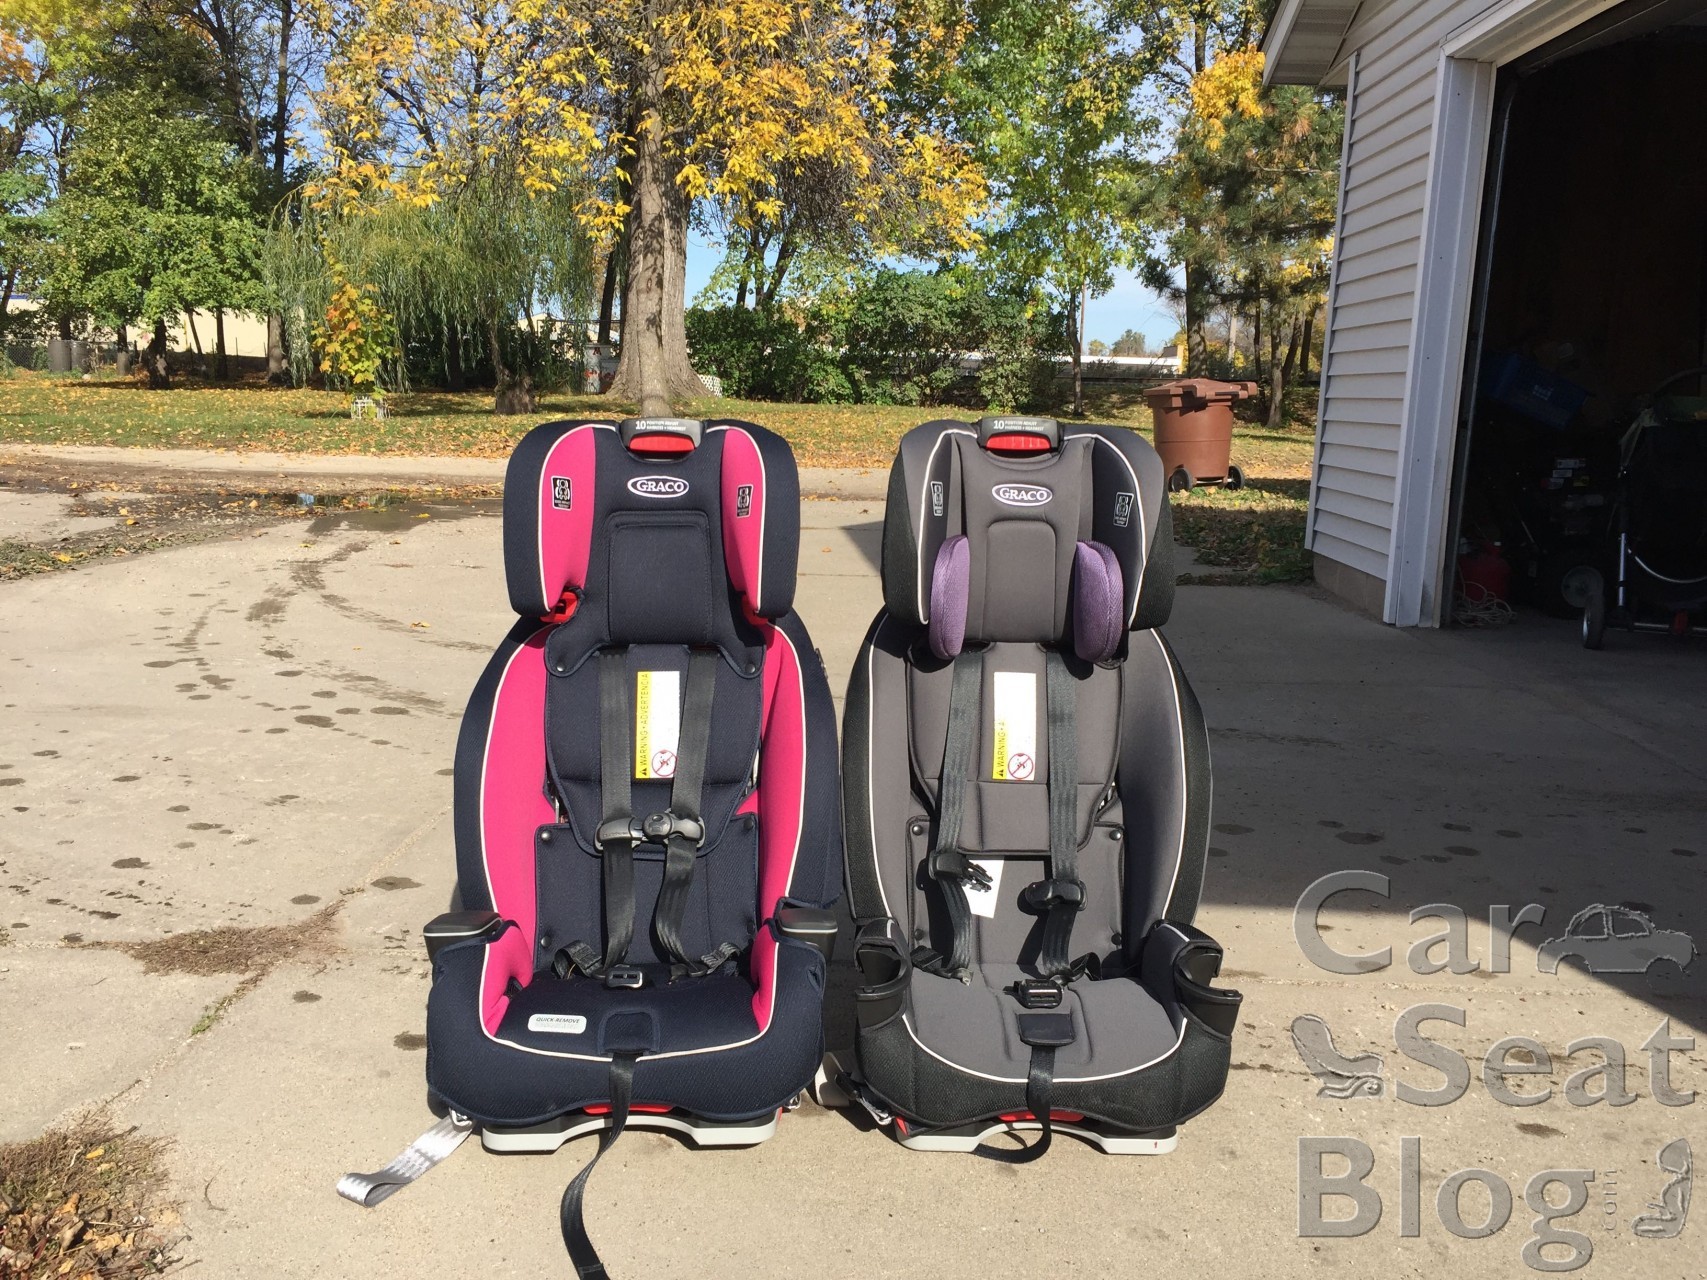 2020 Graco SlimFit 3-in-1 Review 